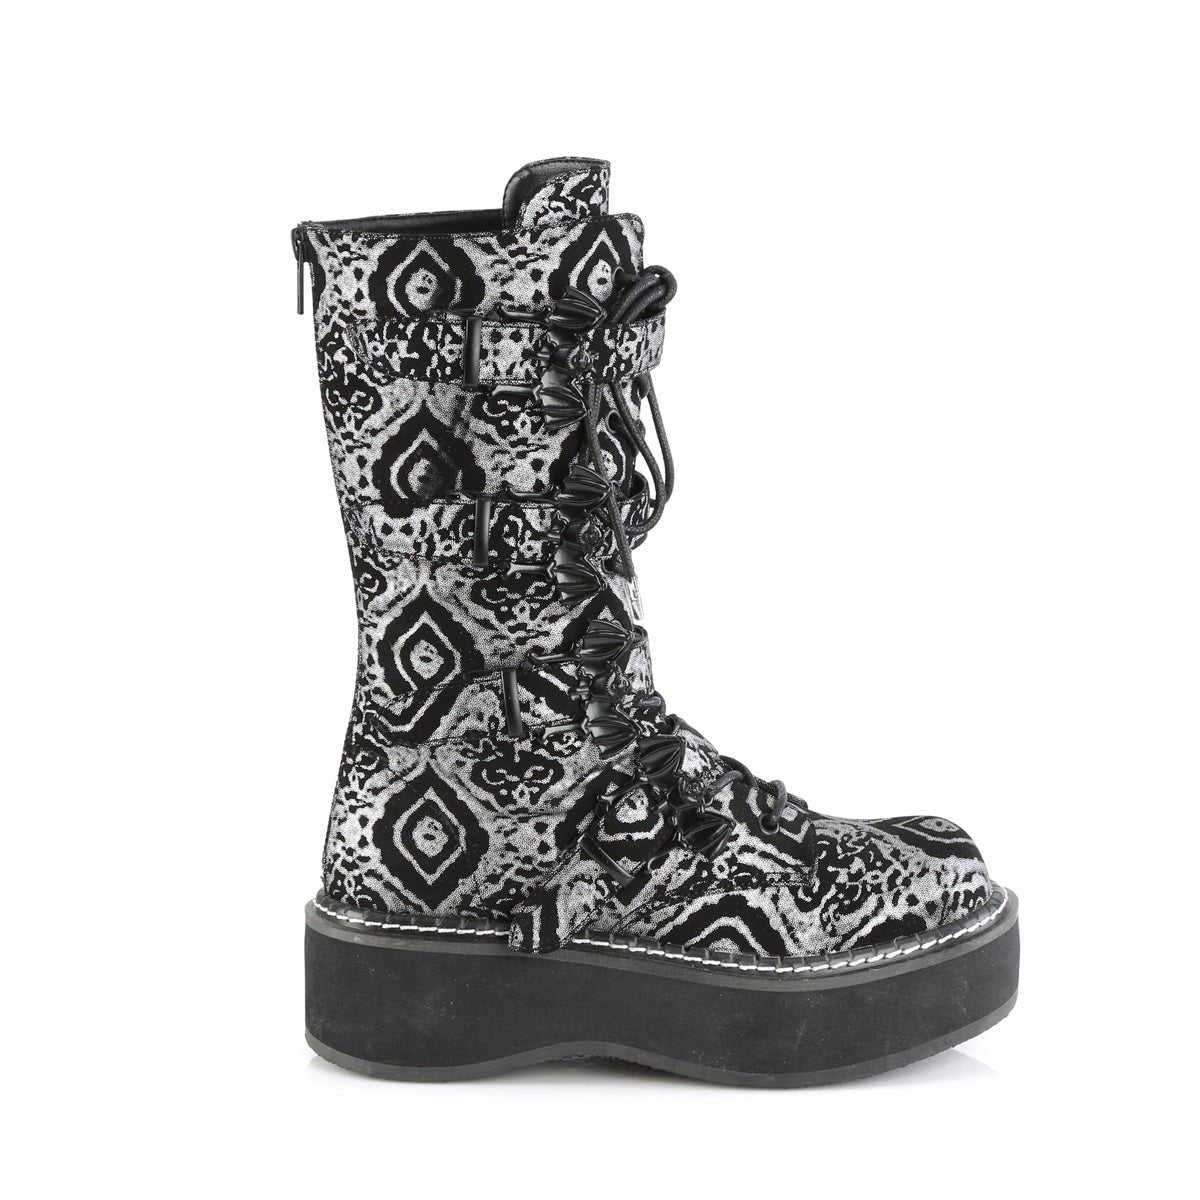 Too Fast | Demonia Emily 322 | Black &amp; Silver Faux Nubuck Leather Women&#39;s Mid Calf Boots